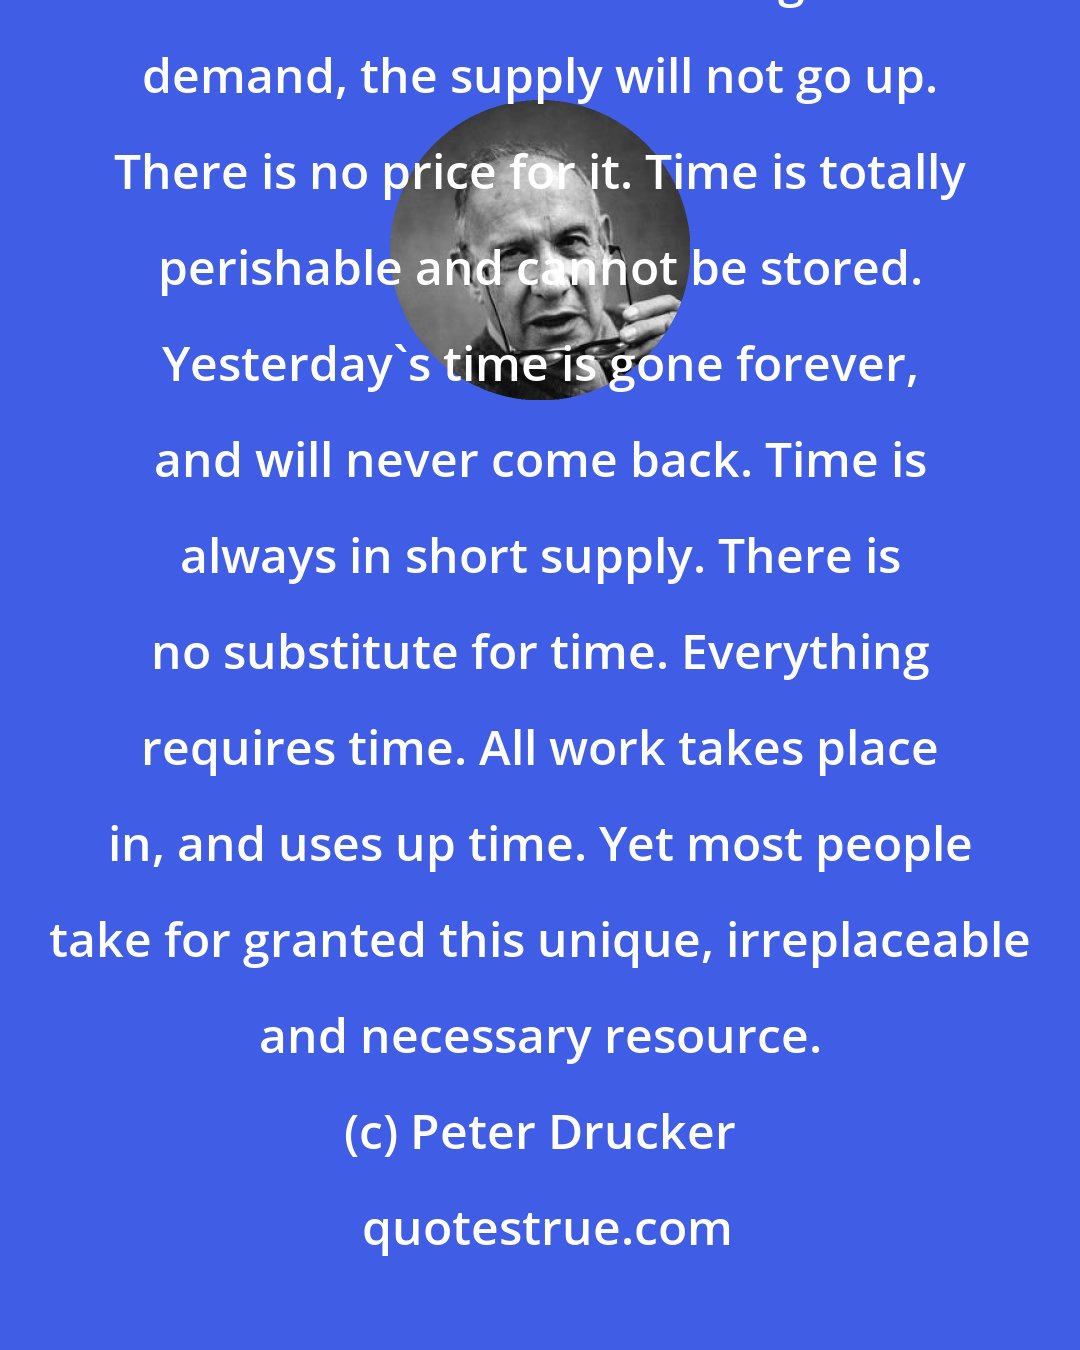 Peter Drucker: One cannot buy, rent or hire more time. The supply of time is totally inelastic. No matter how high the demand, the supply will not go up. There is no price for it. Time is totally perishable and cannot be stored. Yesterday's time is gone forever, and will never come back. Time is always in short supply. There is no substitute for time. Everything requires time. All work takes place in, and uses up time. Yet most people take for granted this unique, irreplaceable and necessary resource.